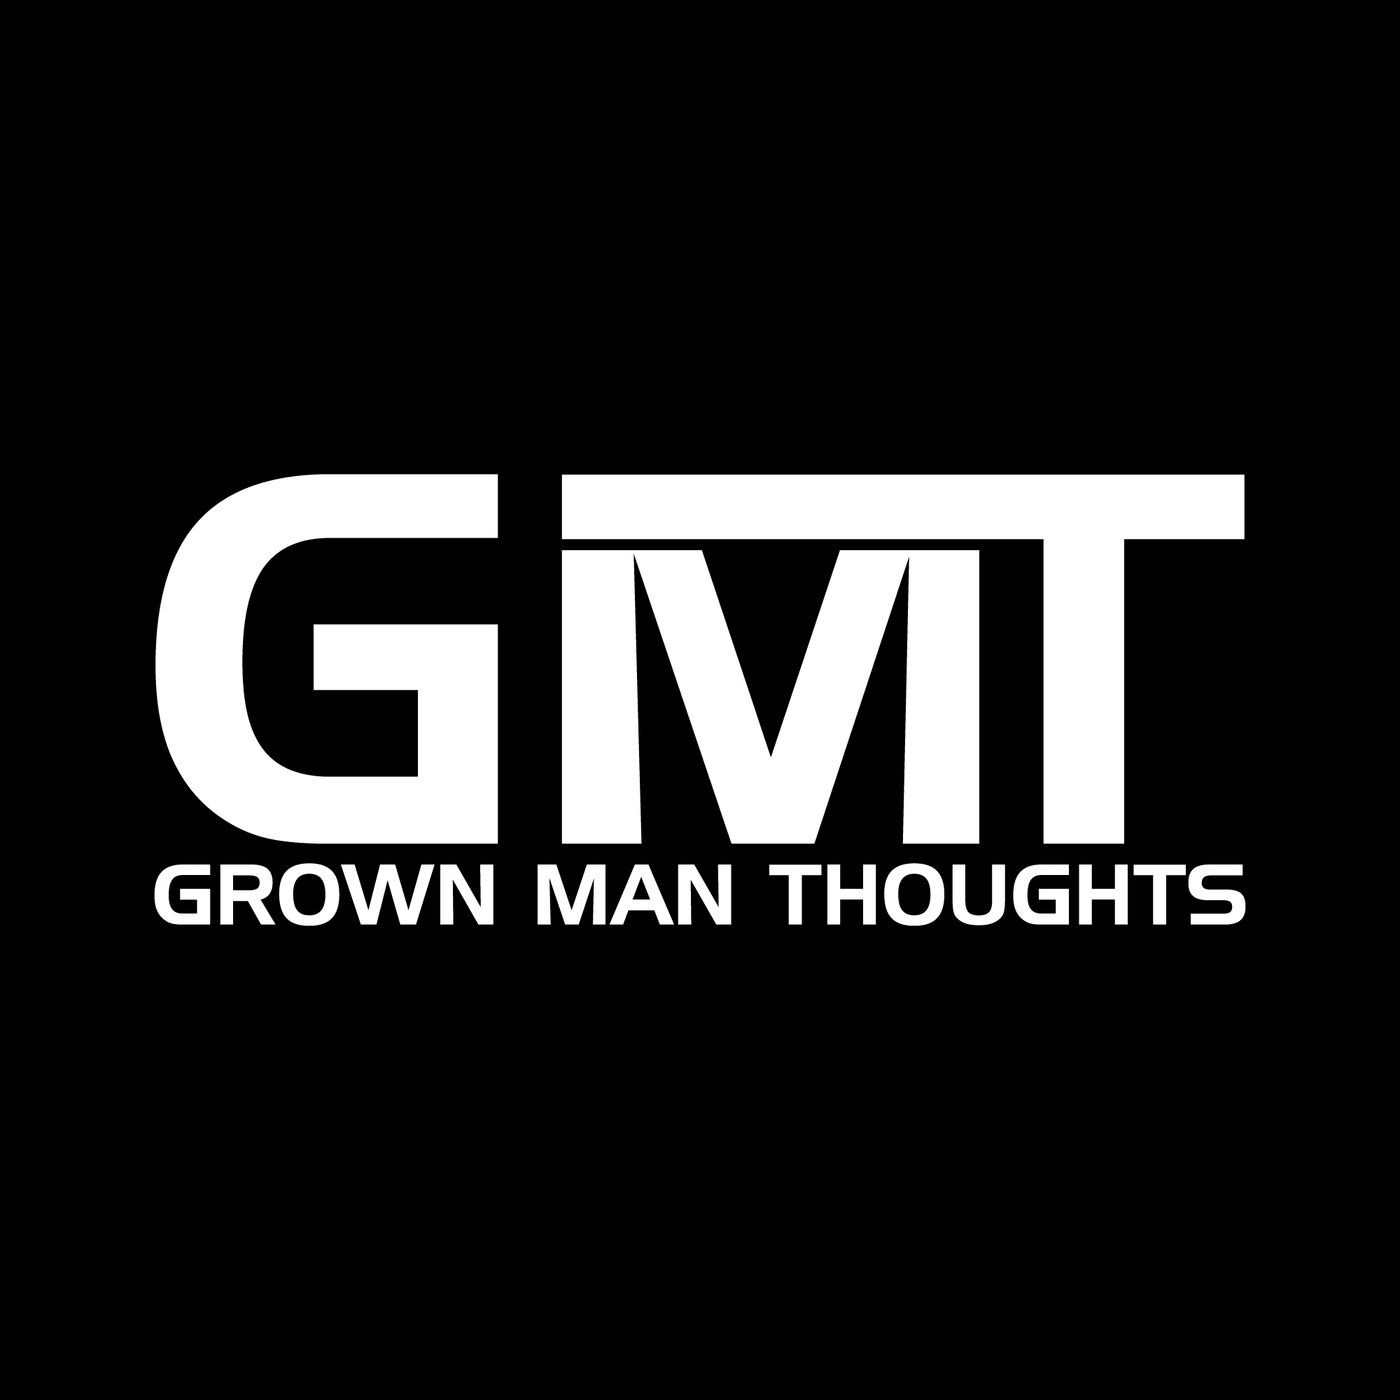 Grown Man Thoughts